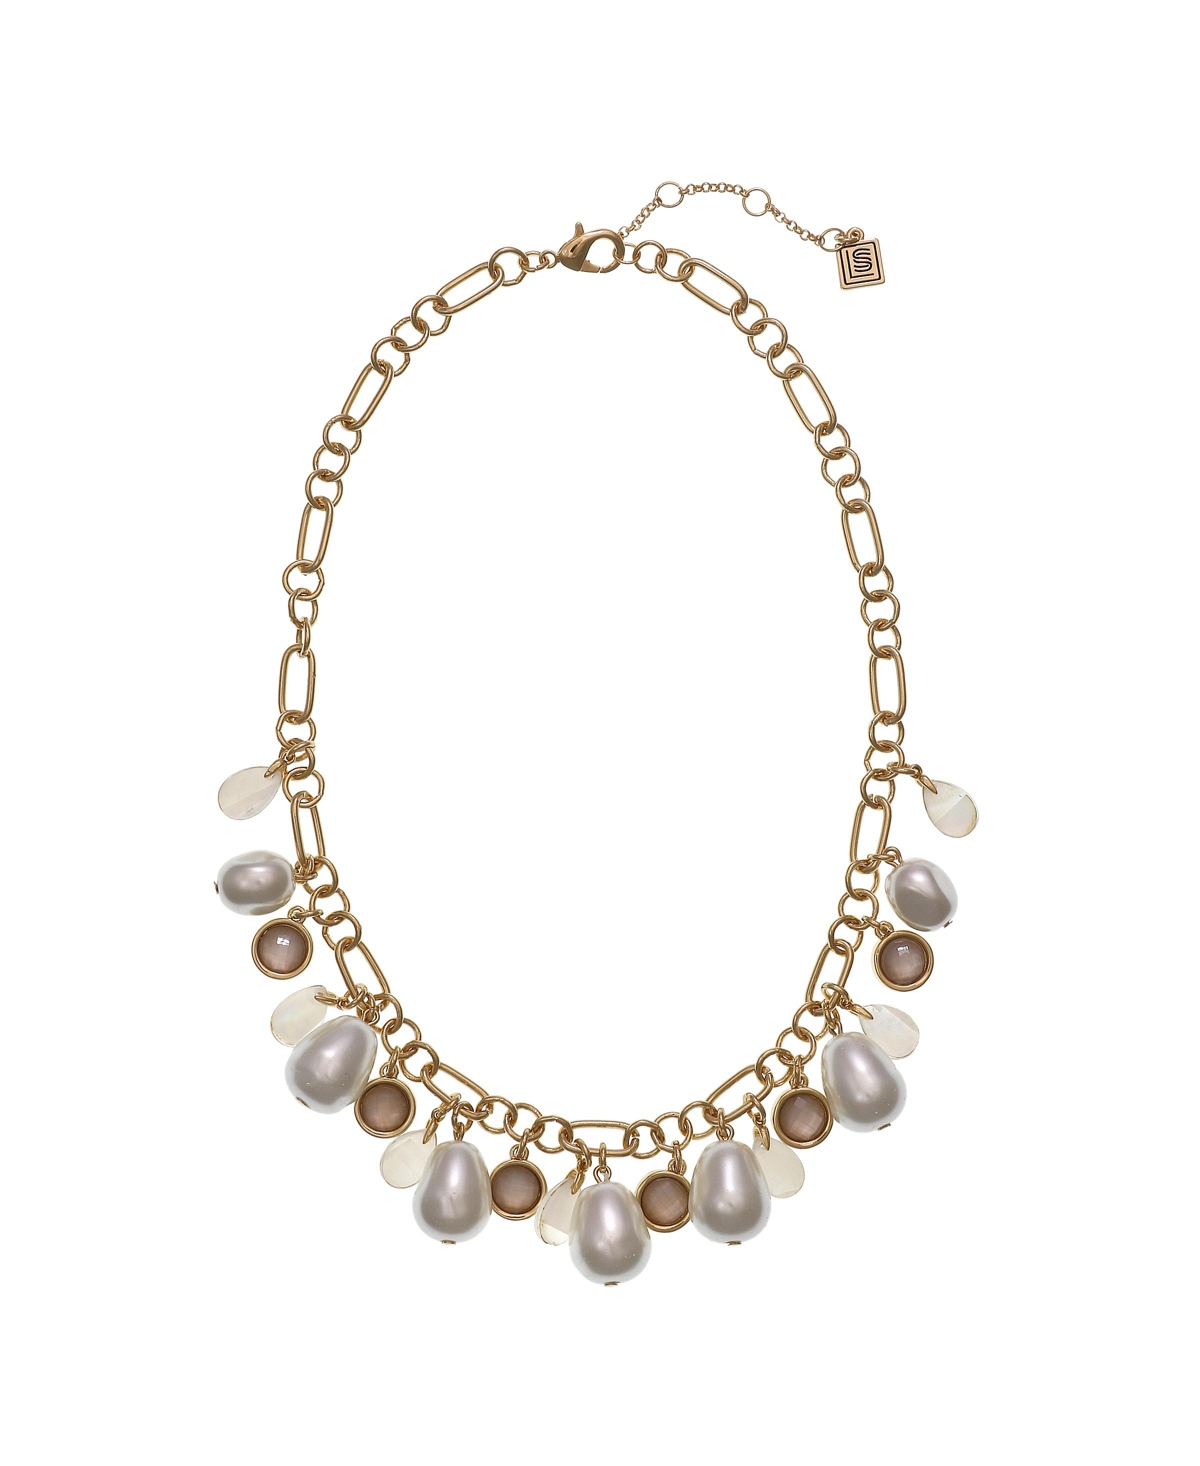 Shakey Pearl Necklace - White